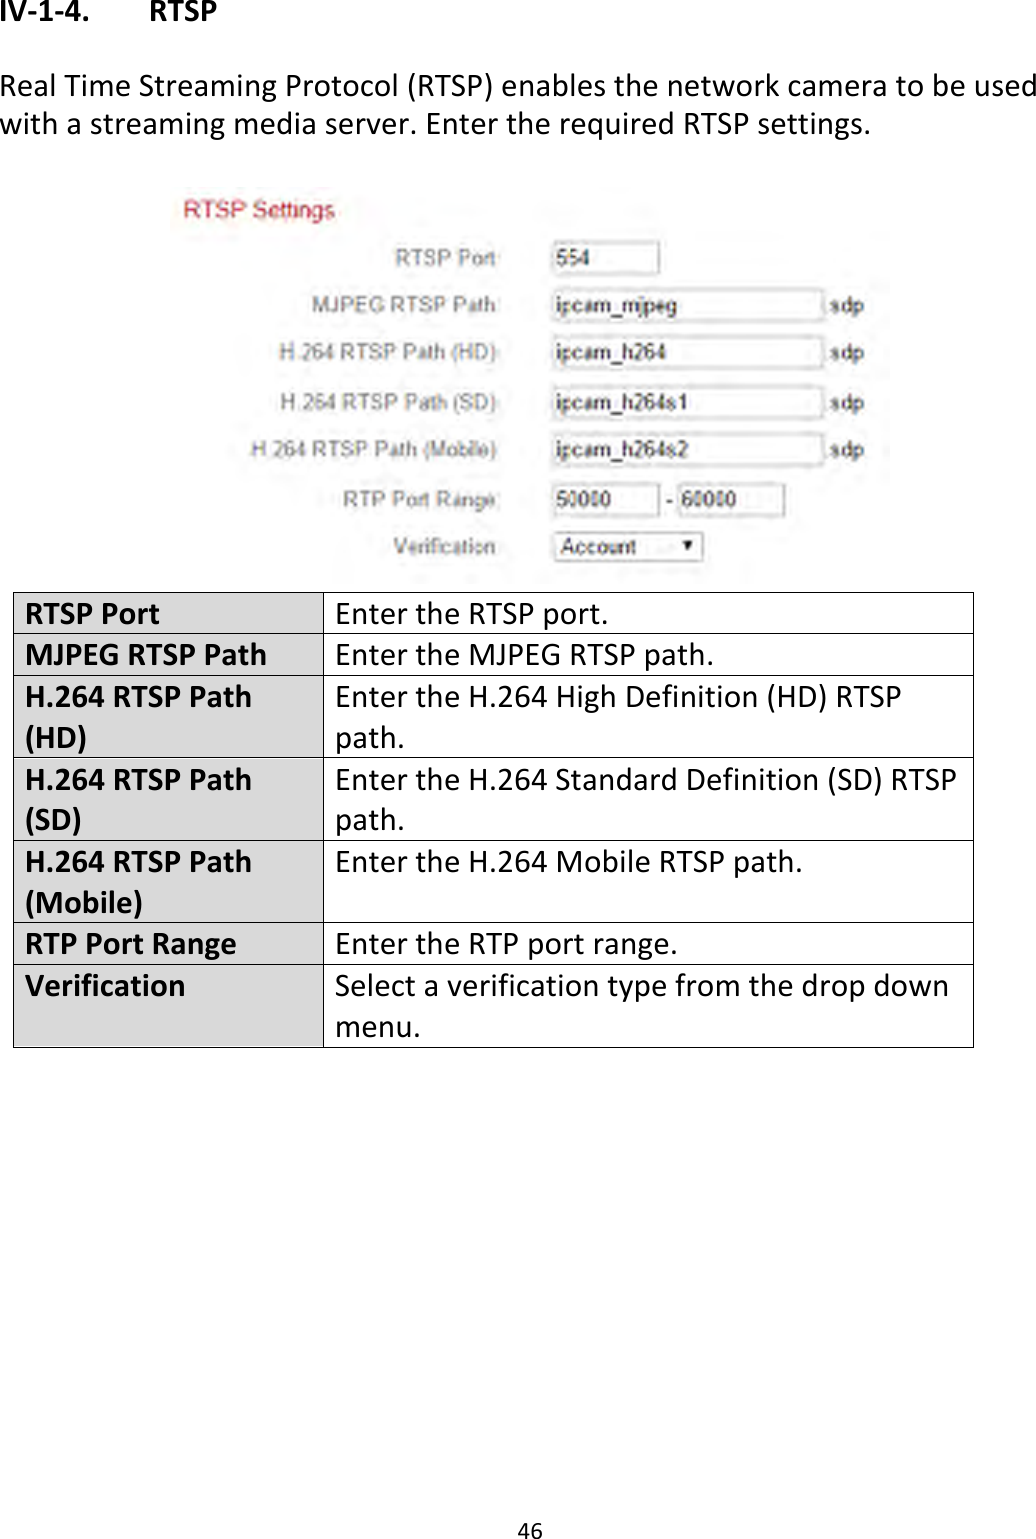 46  IV-1-4.   RTSP  Real Time Streaming Protocol (RTSP) enables the network camera to be used with a streaming media server. Enter the required RTSP settings.   RTSP Port Enter the RTSP port. MJPEG RTSP Path Enter the MJPEG RTSP path.  H.264 RTSP Path (HD) Enter the H.264 High Definition (HD) RTSP path. H.264 RTSP Path (SD) Enter the H.264 Standard Definition (SD) RTSP path. H.264 RTSP Path (Mobile) Enter the H.264 Mobile RTSP path. RTP Port Range Enter the RTP port range. Verification Select a verification type from the drop down menu.  